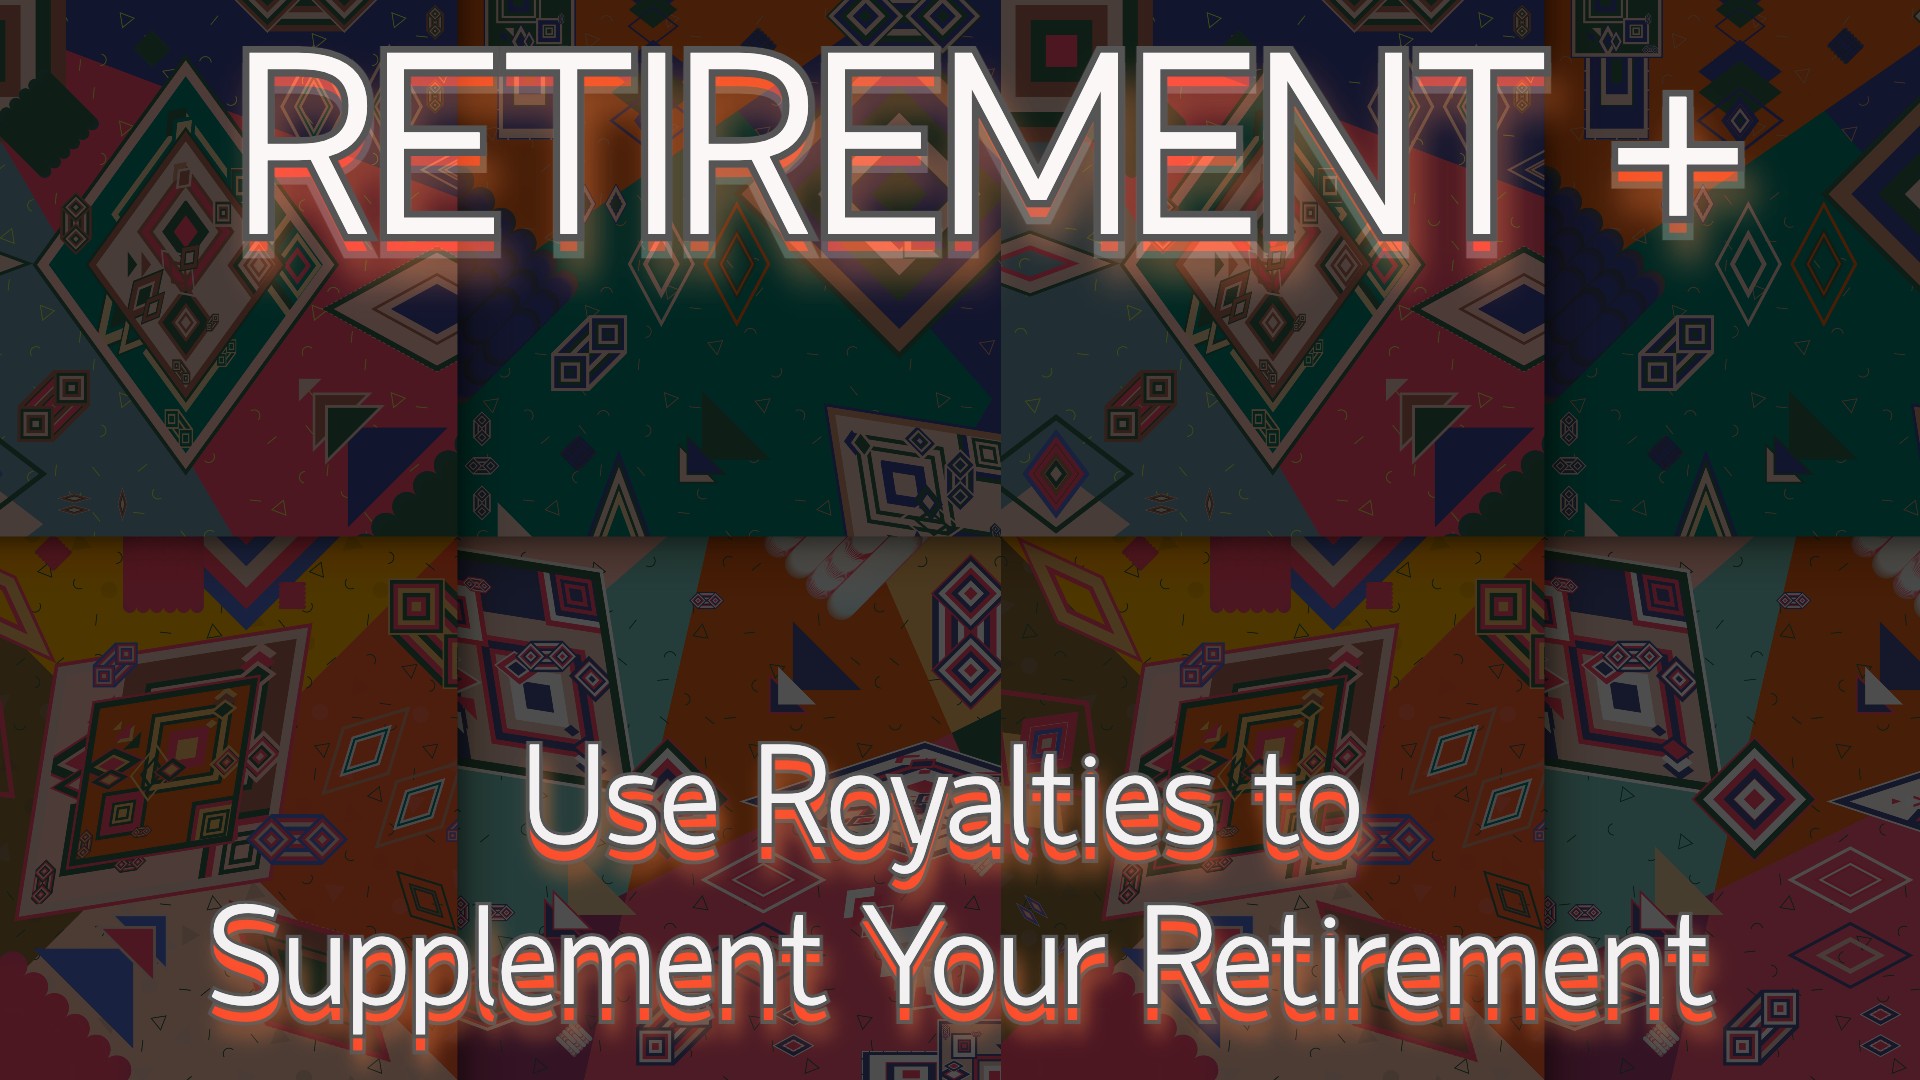 Retirement Plus: Use Royalties to Supplement Your Retirement